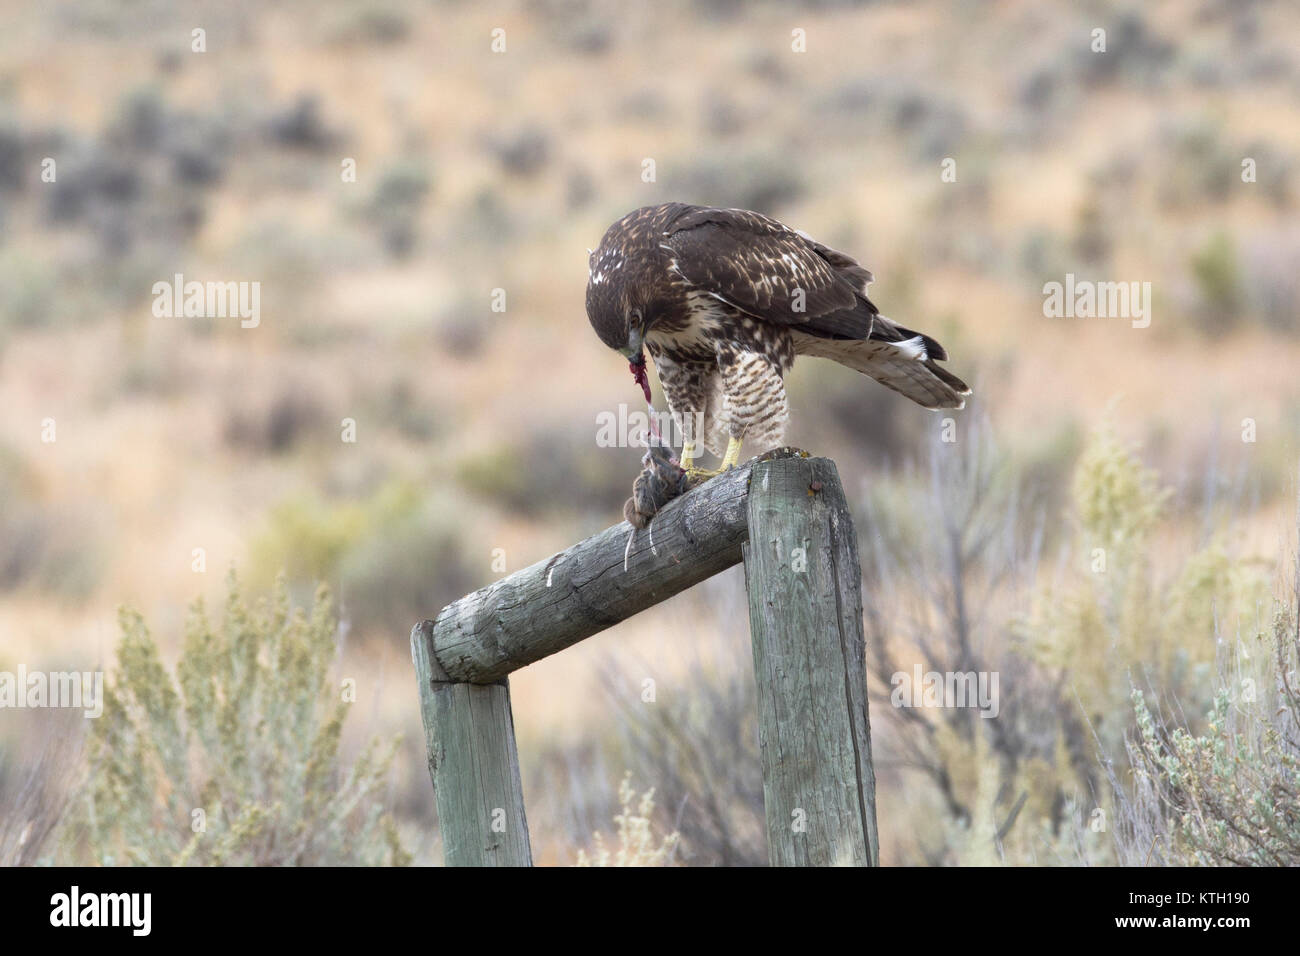 Red-tailed hawk eating prey in British Columbia, Canada. Banque D'Images